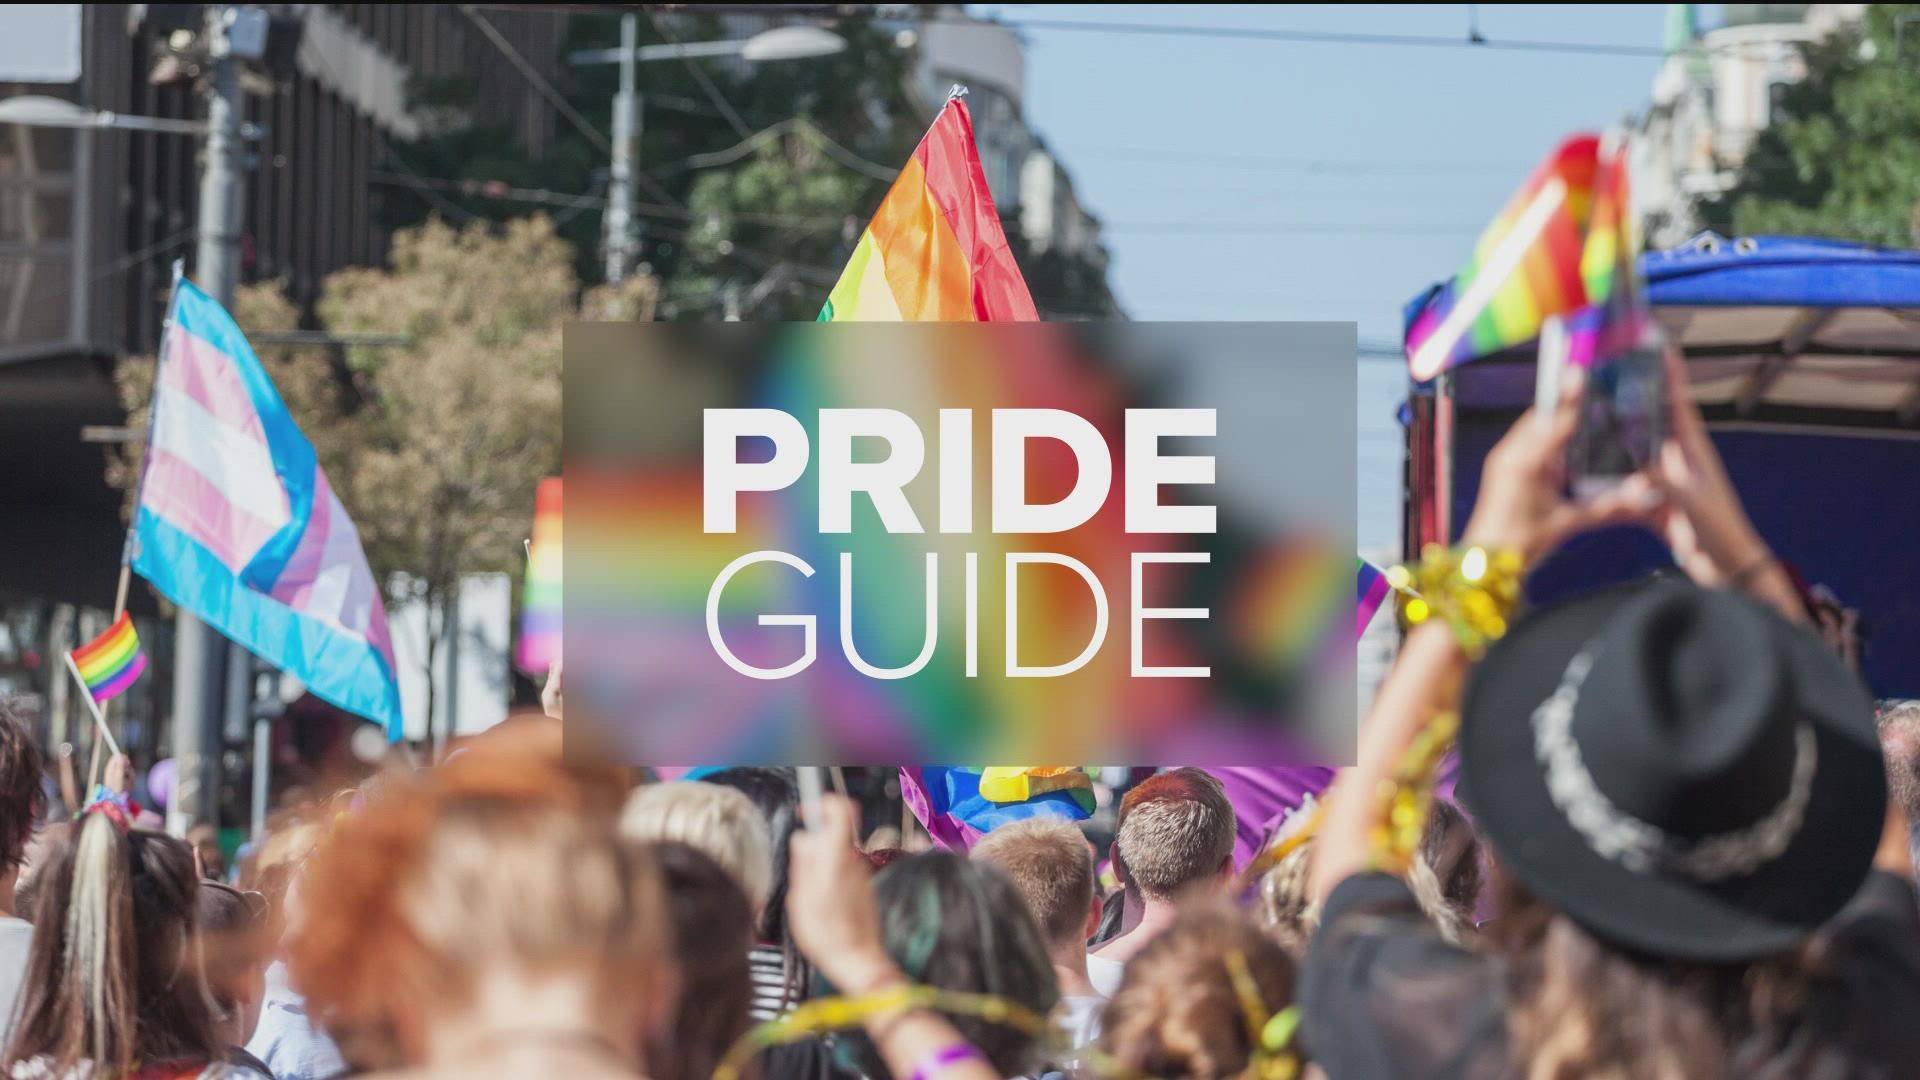 San Diego Pride week is back in-person, here's a list of some of the events happening in July.